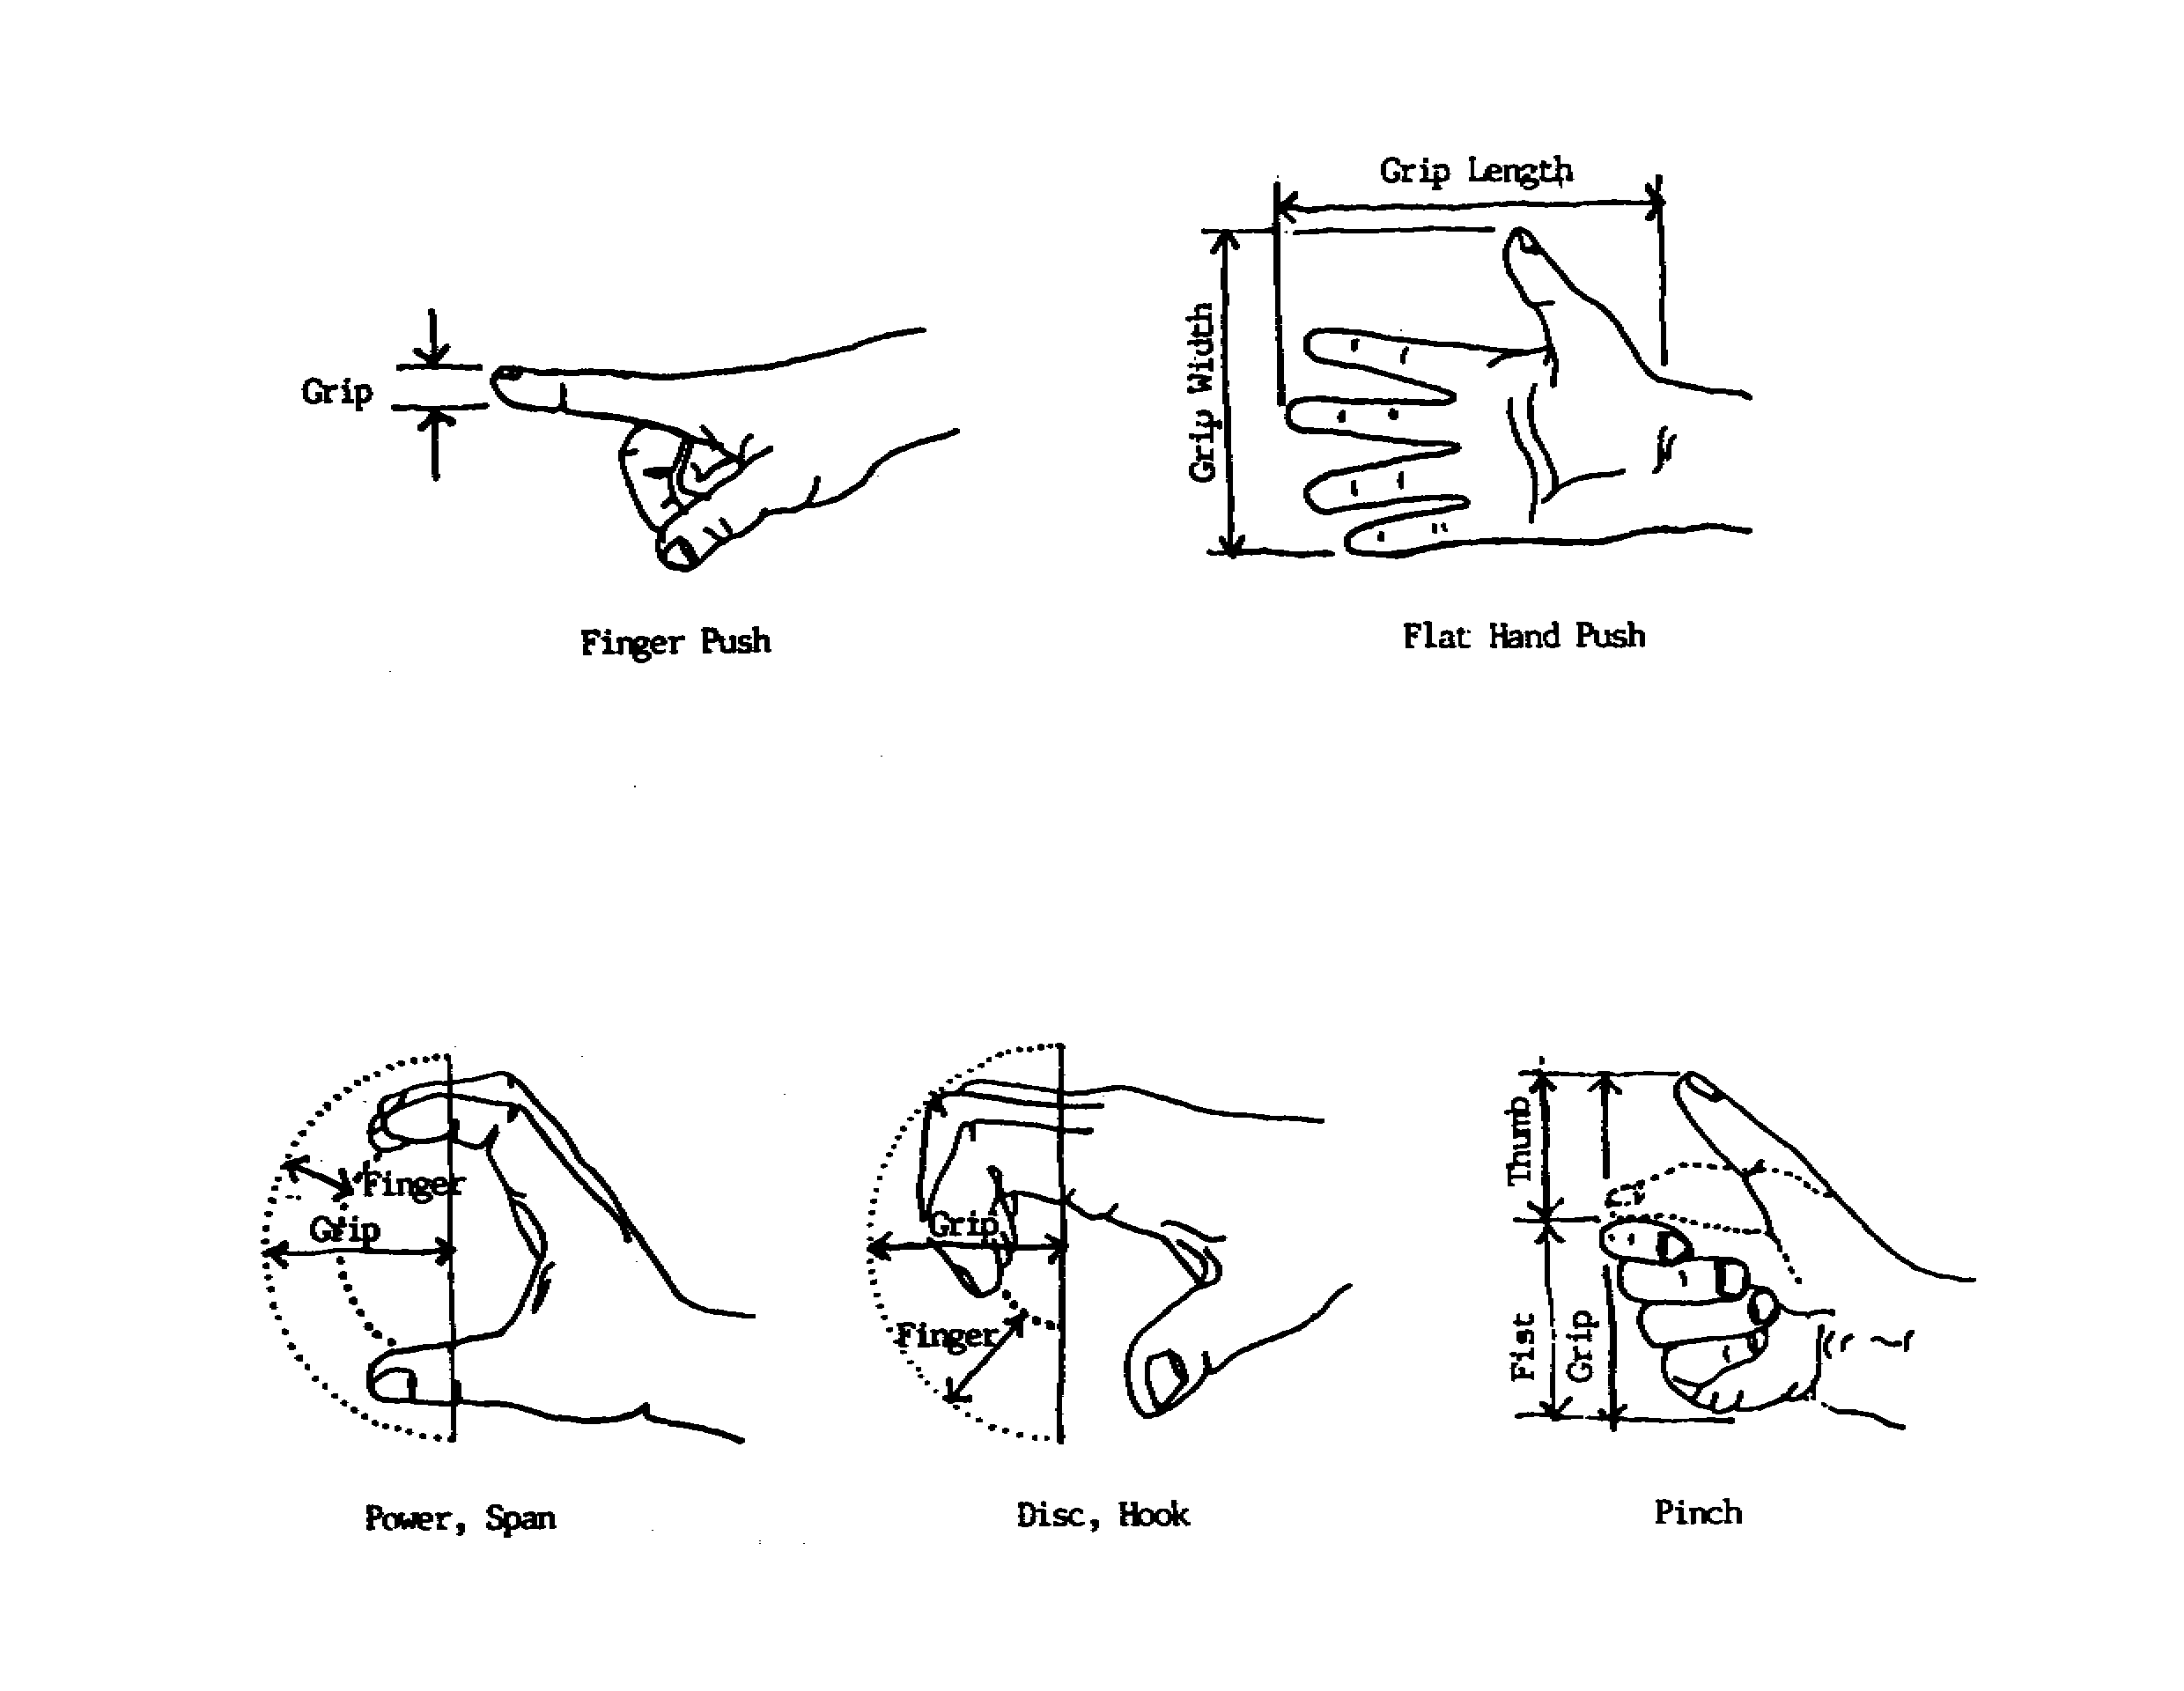  This figure defines grip, grip width, and grip clearance for a variety of clearance situations.  There are five sub-figures, one each for finger push, flat hand push, power and span grip, disc and hook, and the pinch grip.  The individual figures are available by selecting the links at the bottom of this page. 